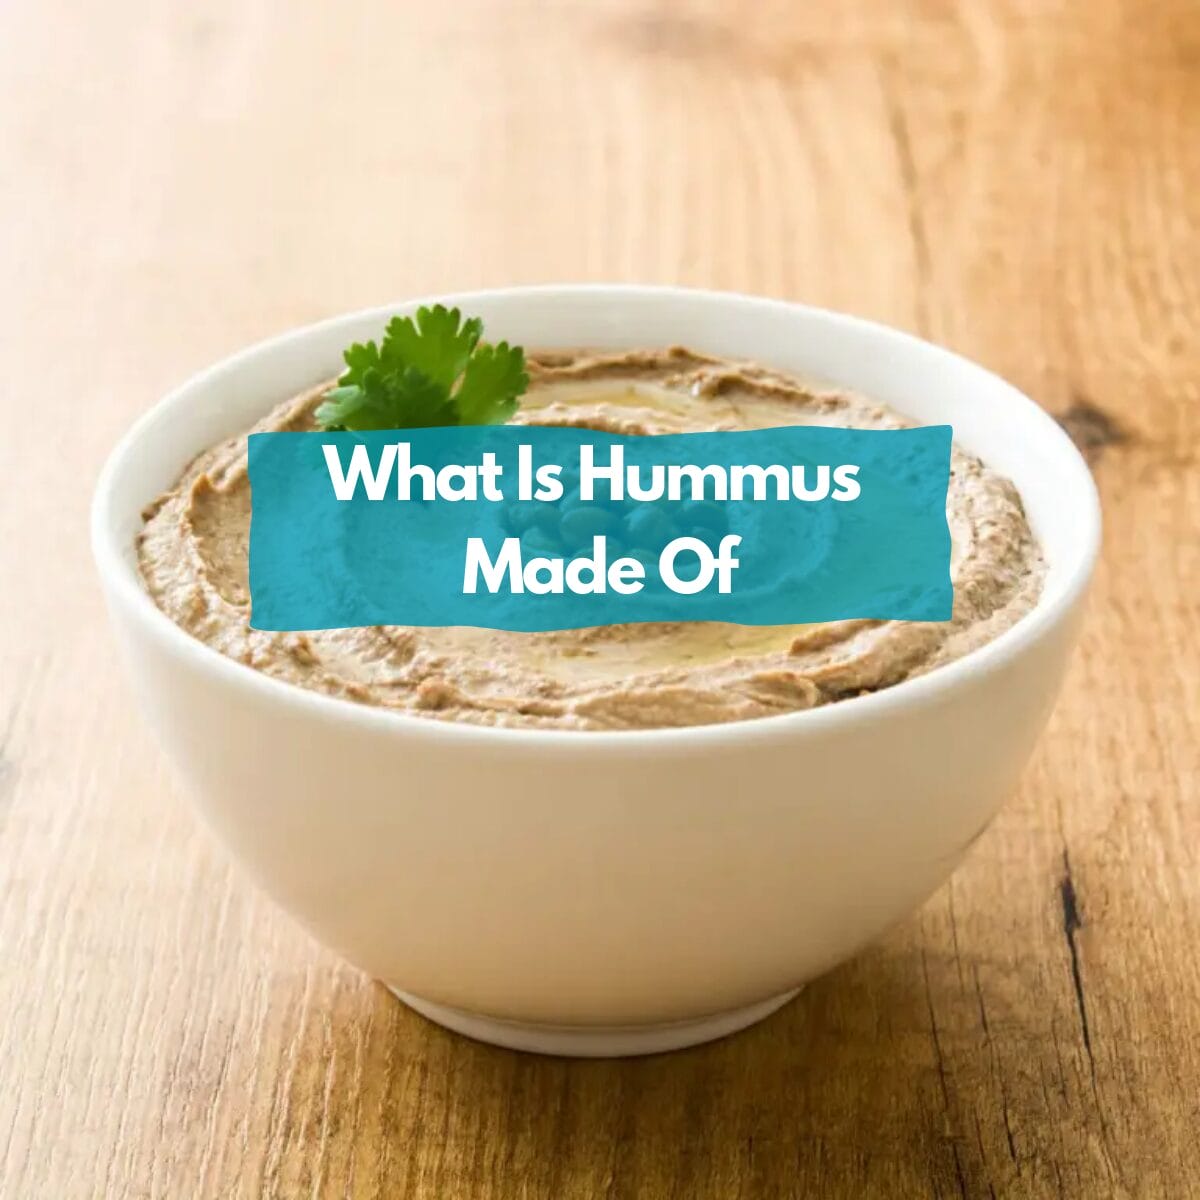 What is Hummus Made Of